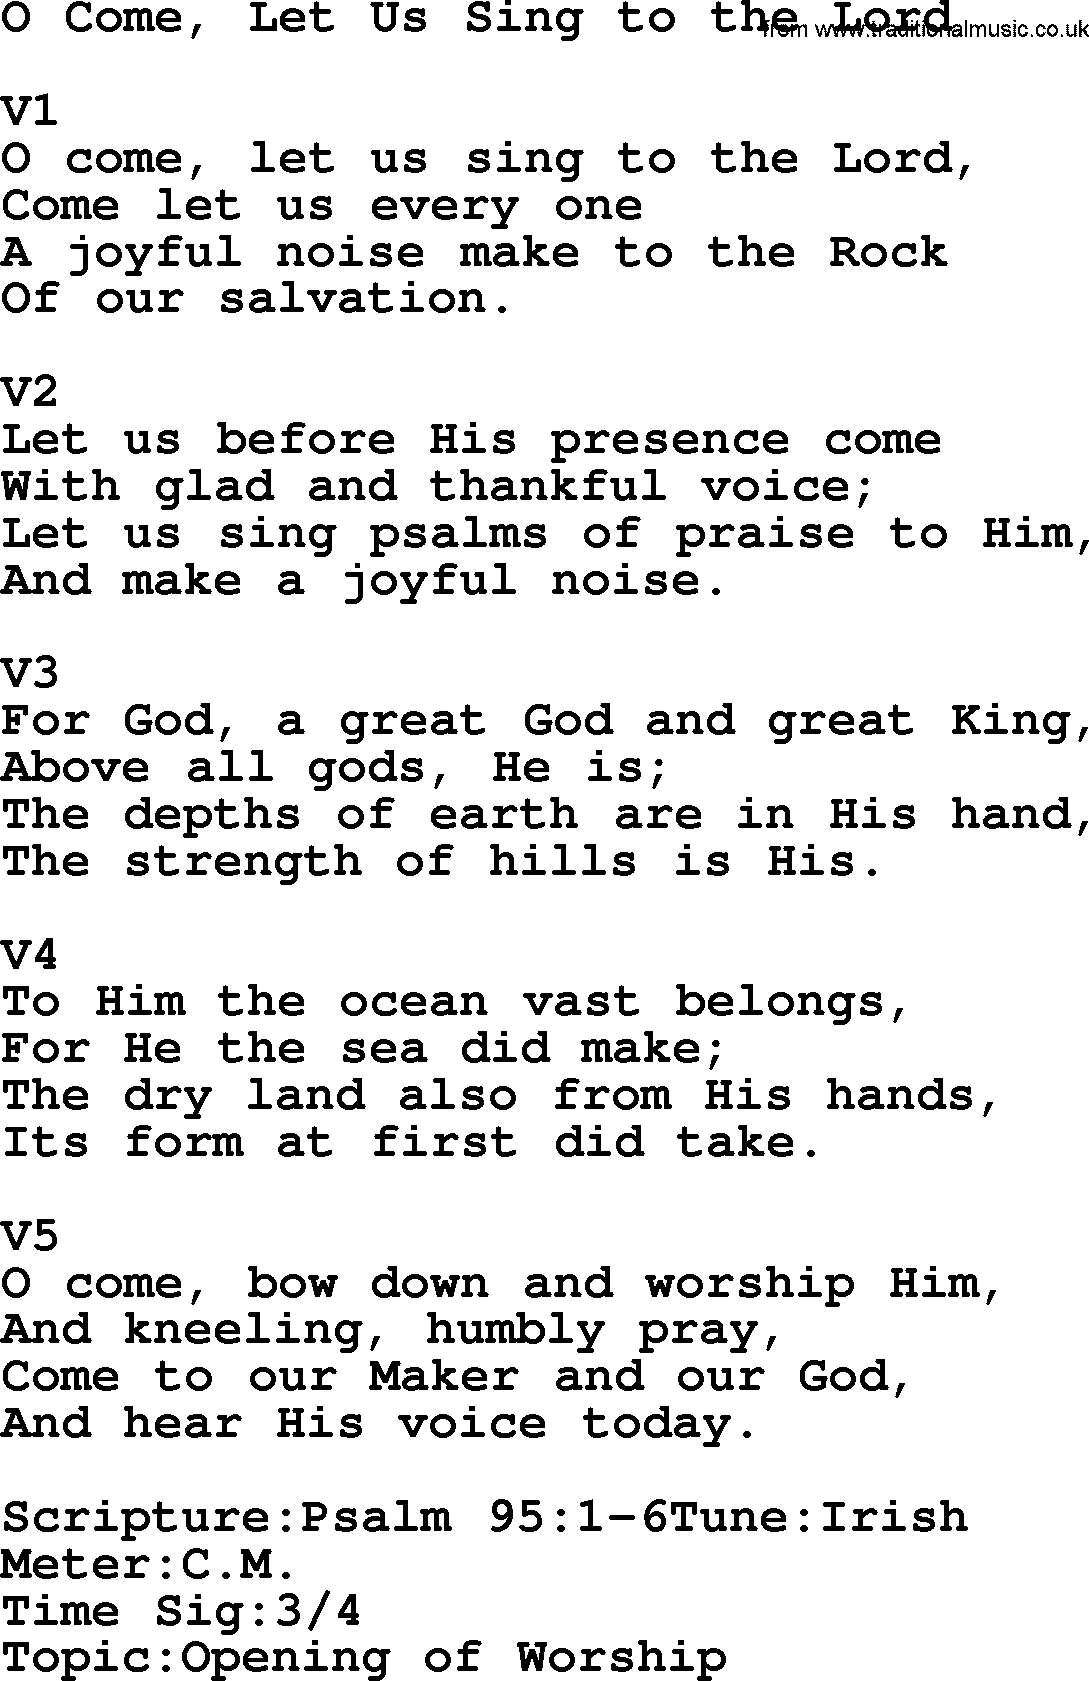 Adventist Hynms collection, Hymn: O Come, Let Us Sing To The Lord, lyrics with PDF